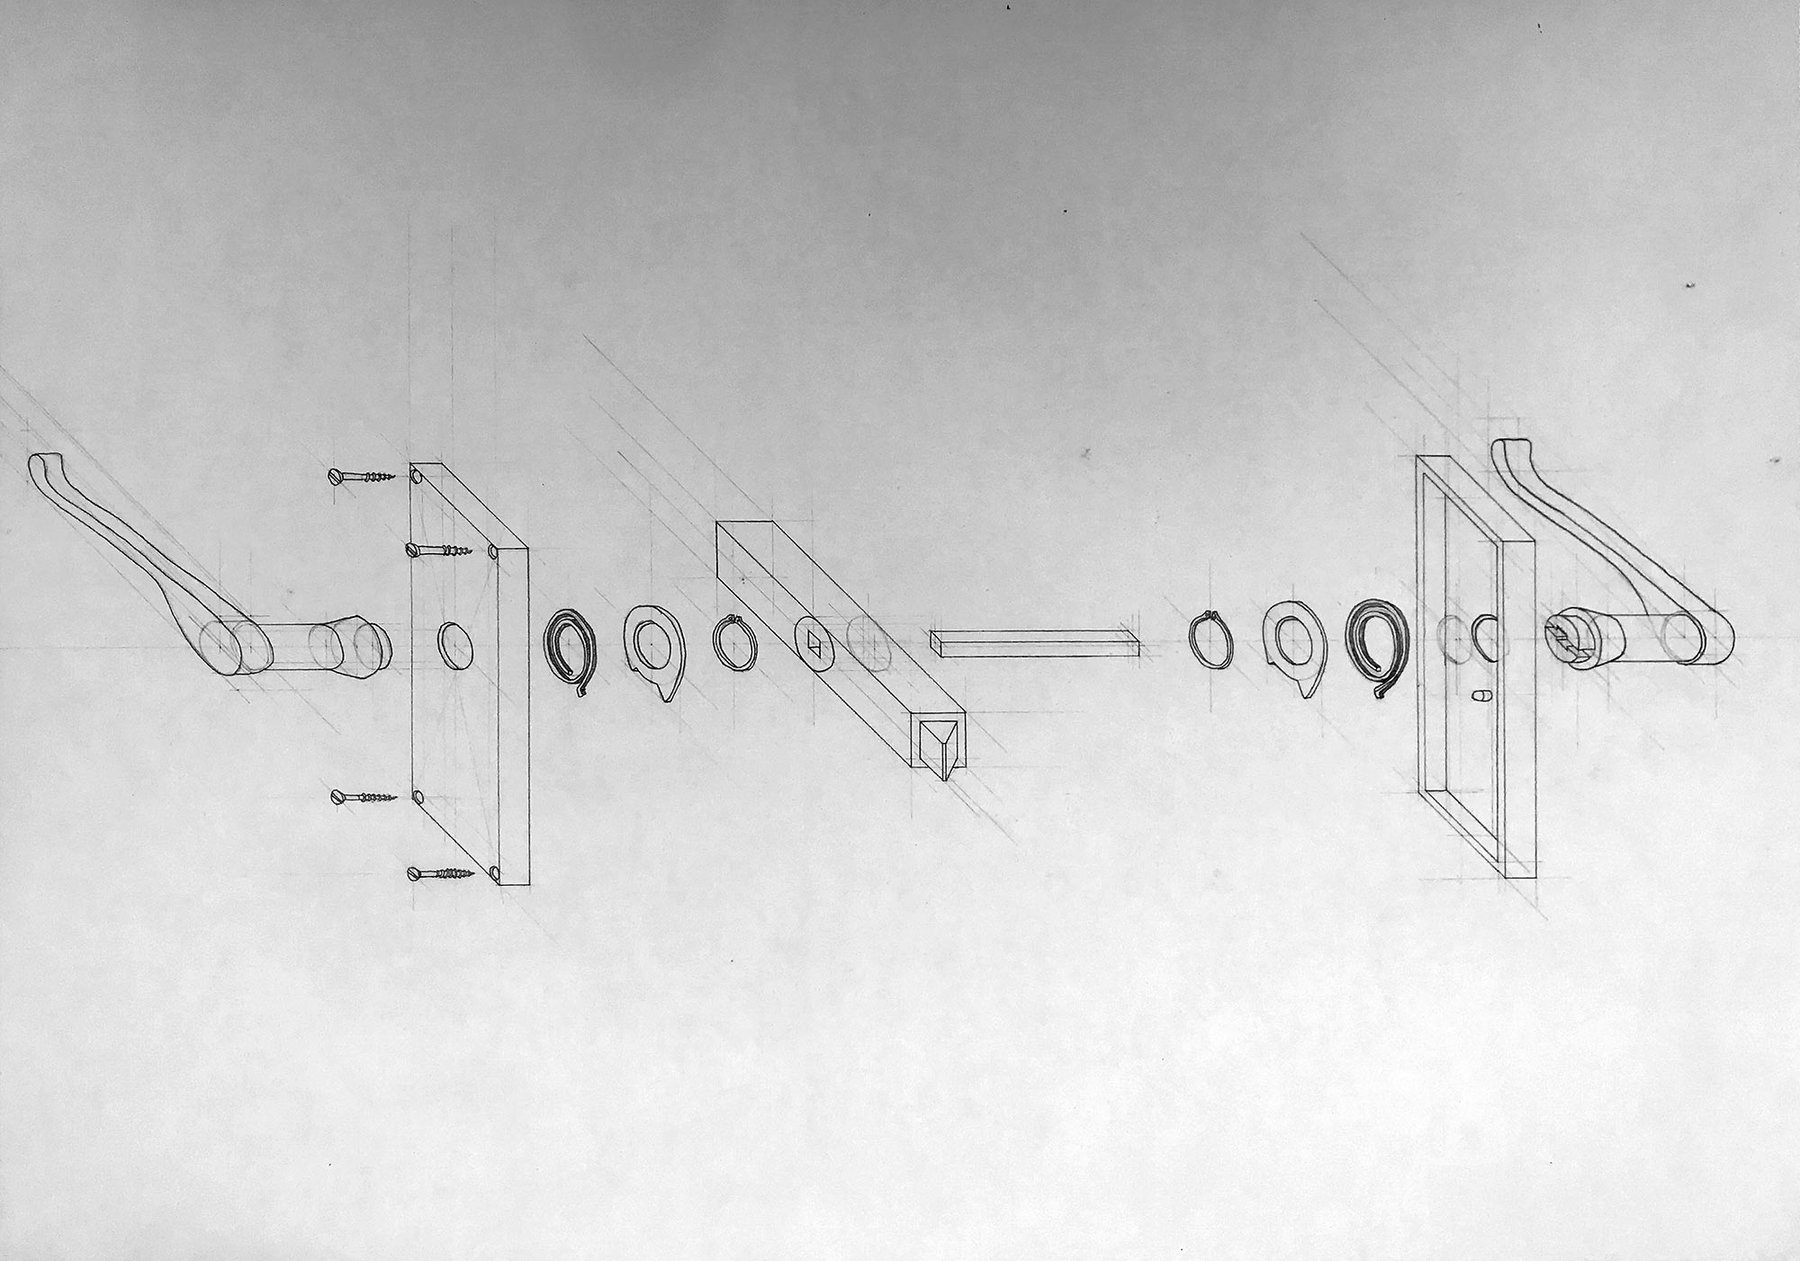 This drawing shows the mechanism of a door and handle, with all parts "exploded" along an axis, so one can see how each part fits into the other